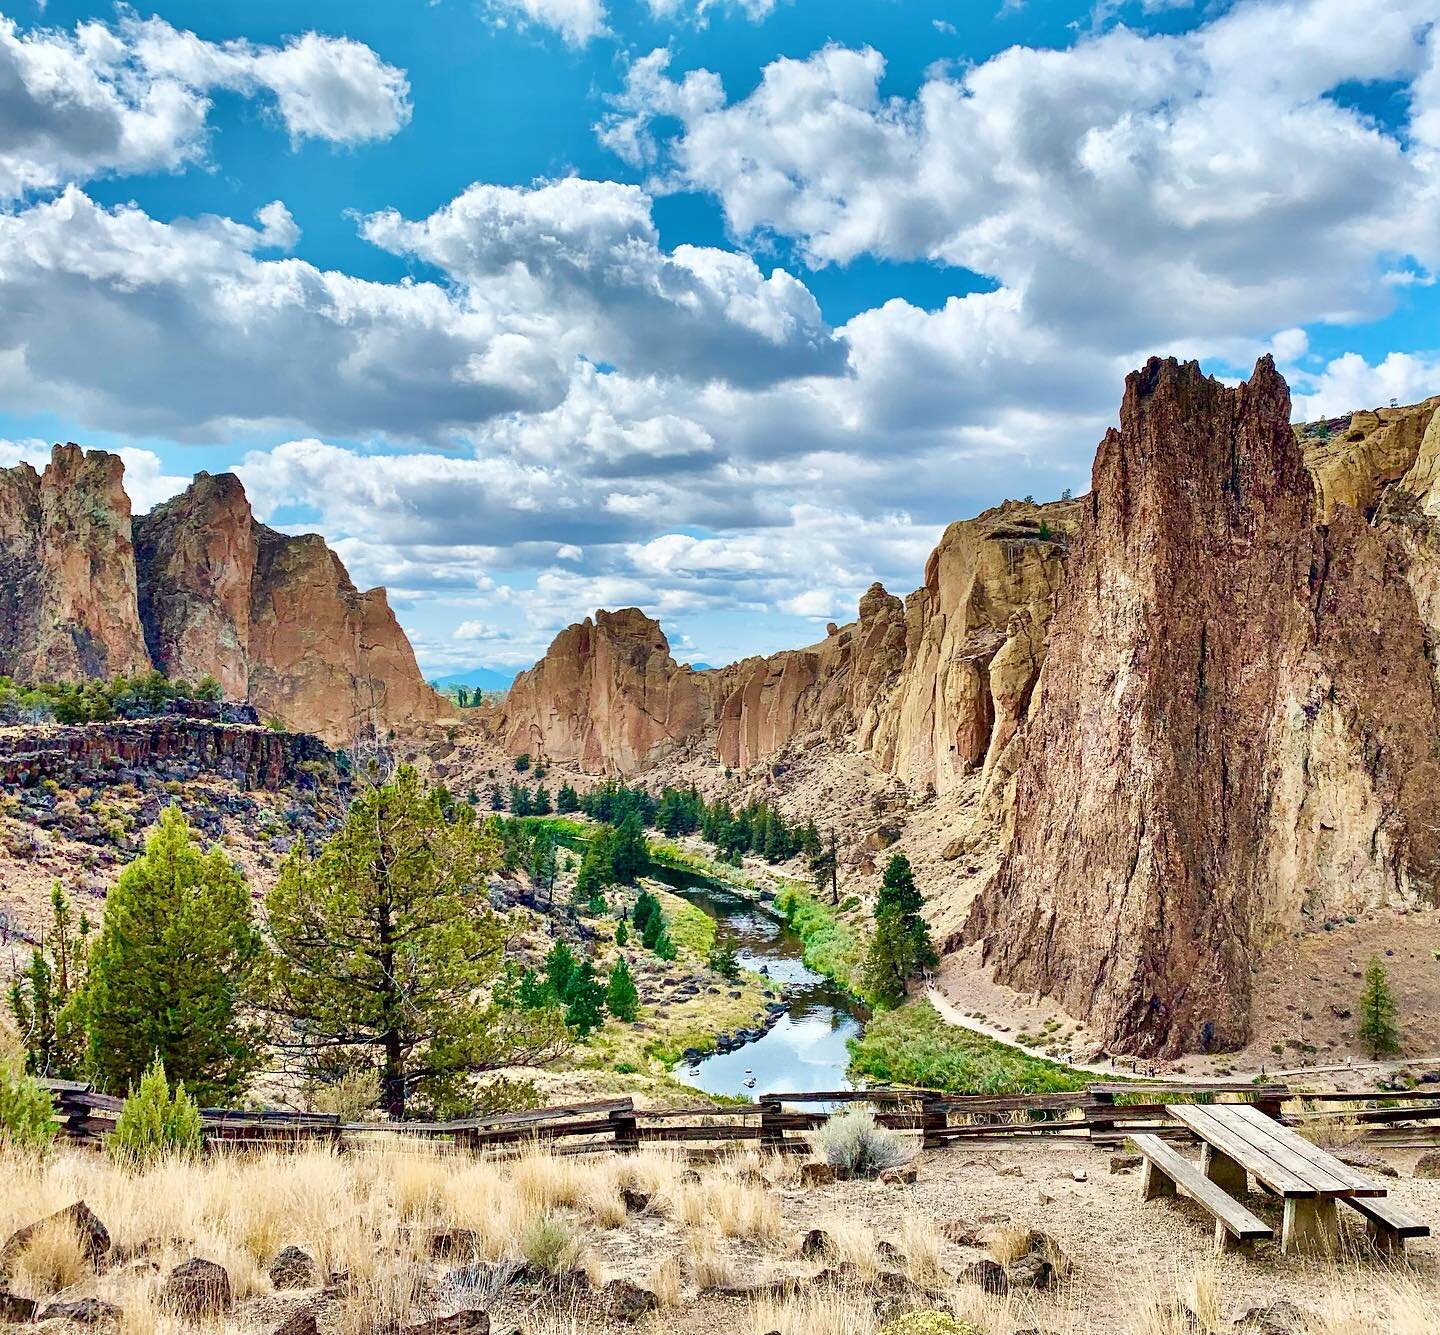 📍Warm Springs/Tenino land.
That&rsquo;s a wrap on my first full PNW summer. This, at Smith Rock State Park (@smithrockpark), was one of my favorite discoveries and scenes of this summer. Smith Rock State Park is one of the 7 Wonders of Oregon. Among